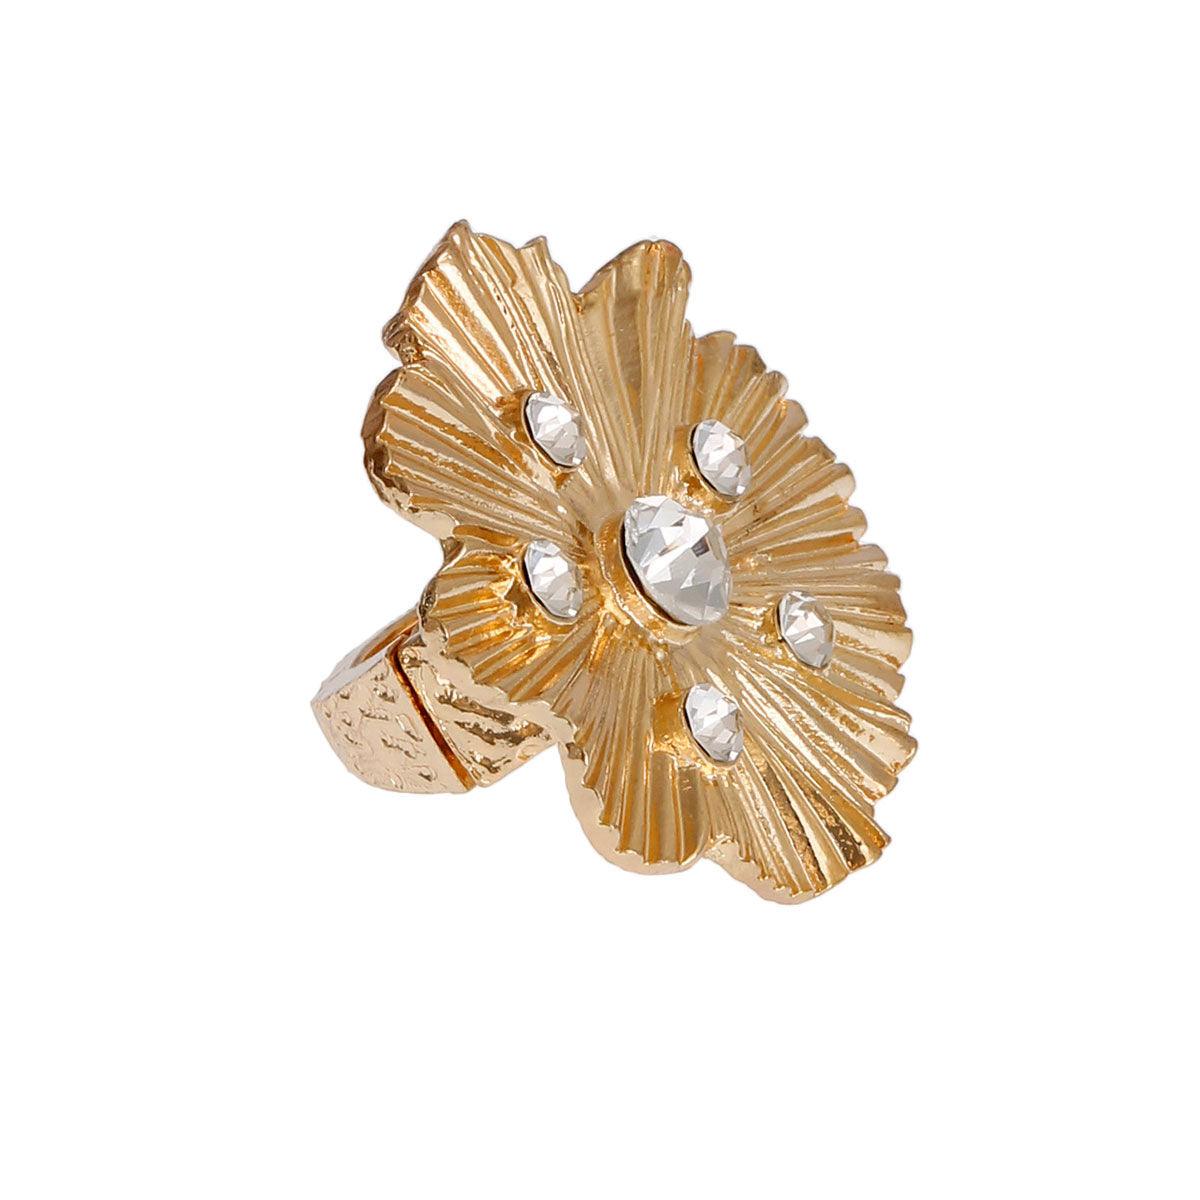 Embellished Gold Flower Ring for Women to Glamorize Your Style